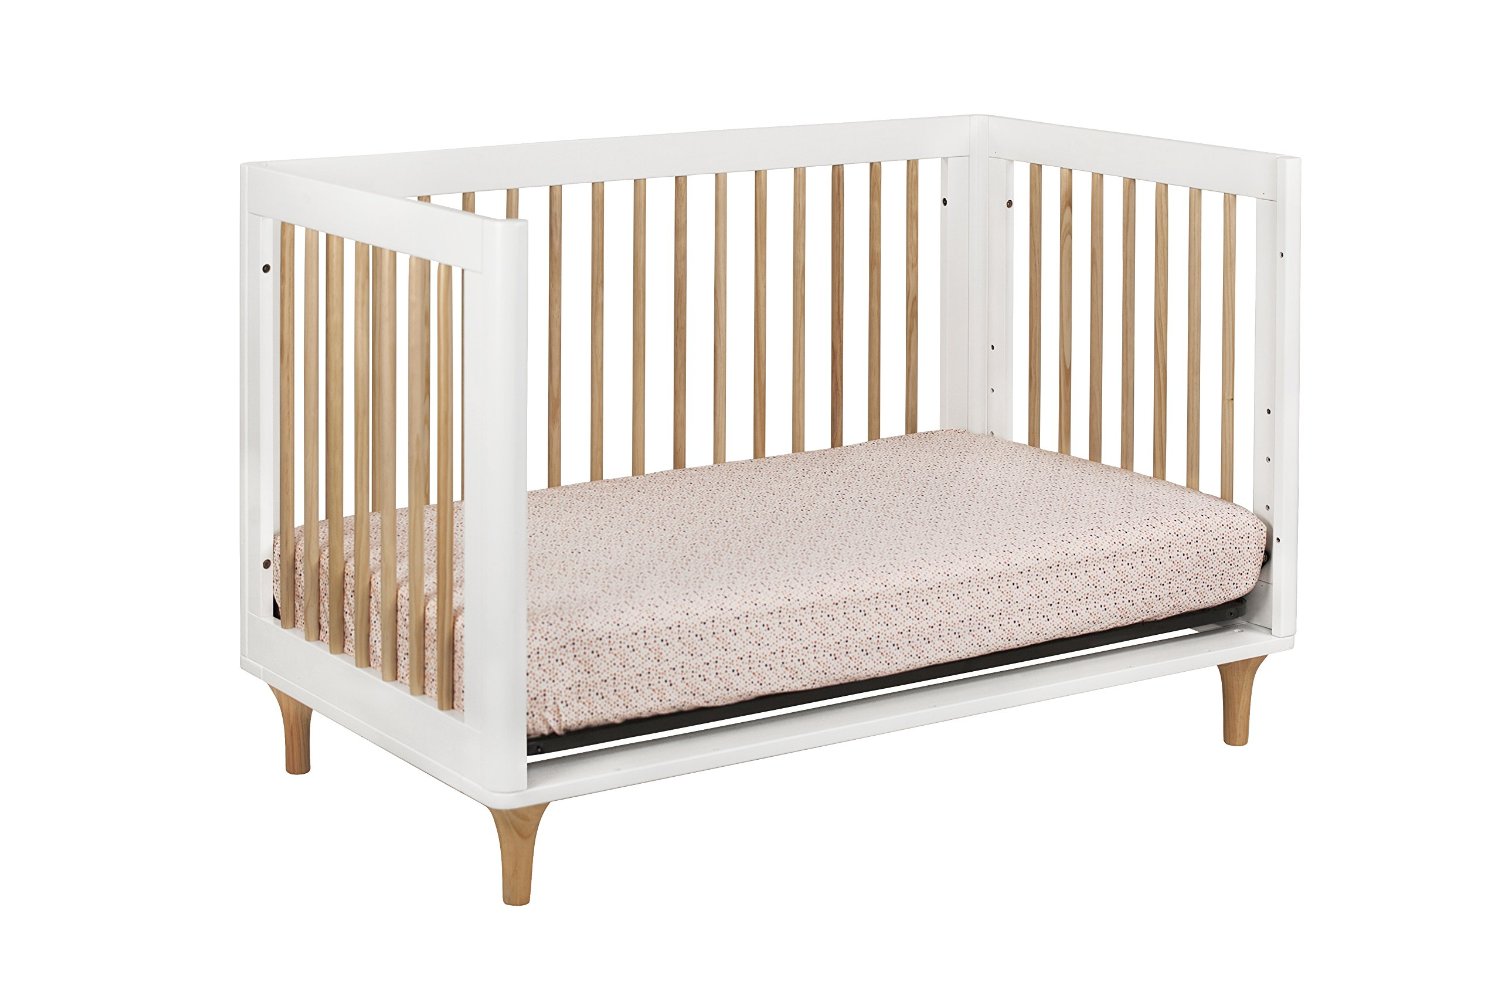 BabyLetto Lolly 3 in 1 Convertible Crib, White and Natural